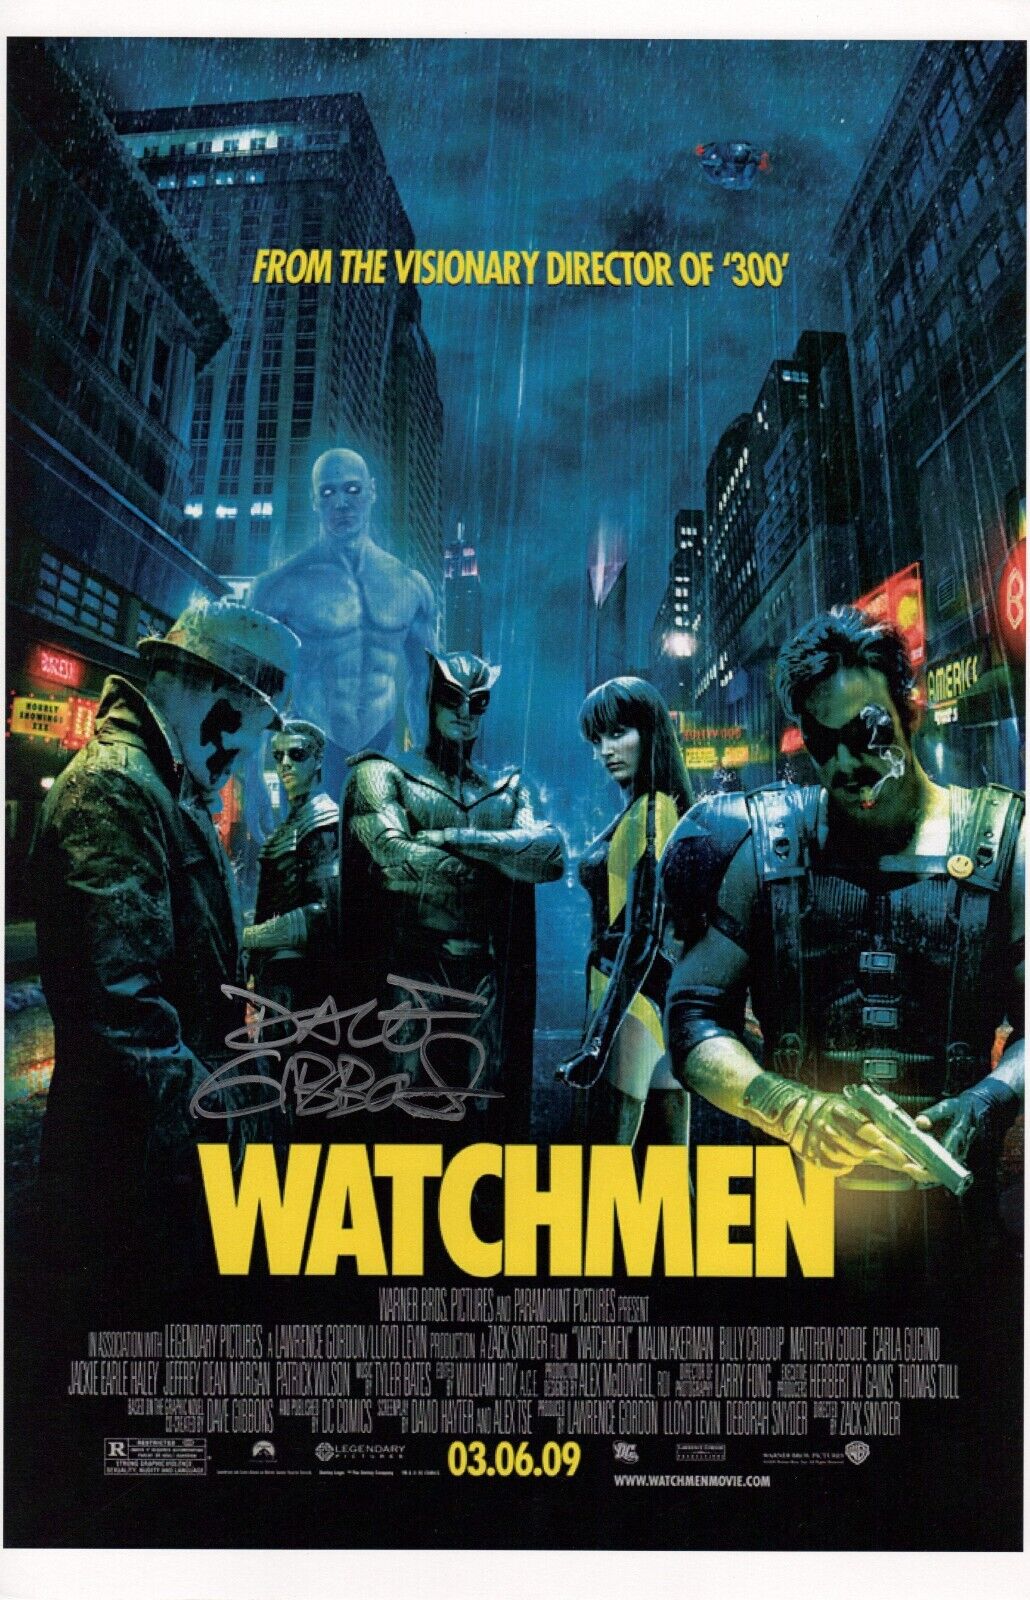 WATCHMEN MOVIE POSTER SIGNED 11X17 ART PRINT DAVE GIBBONS